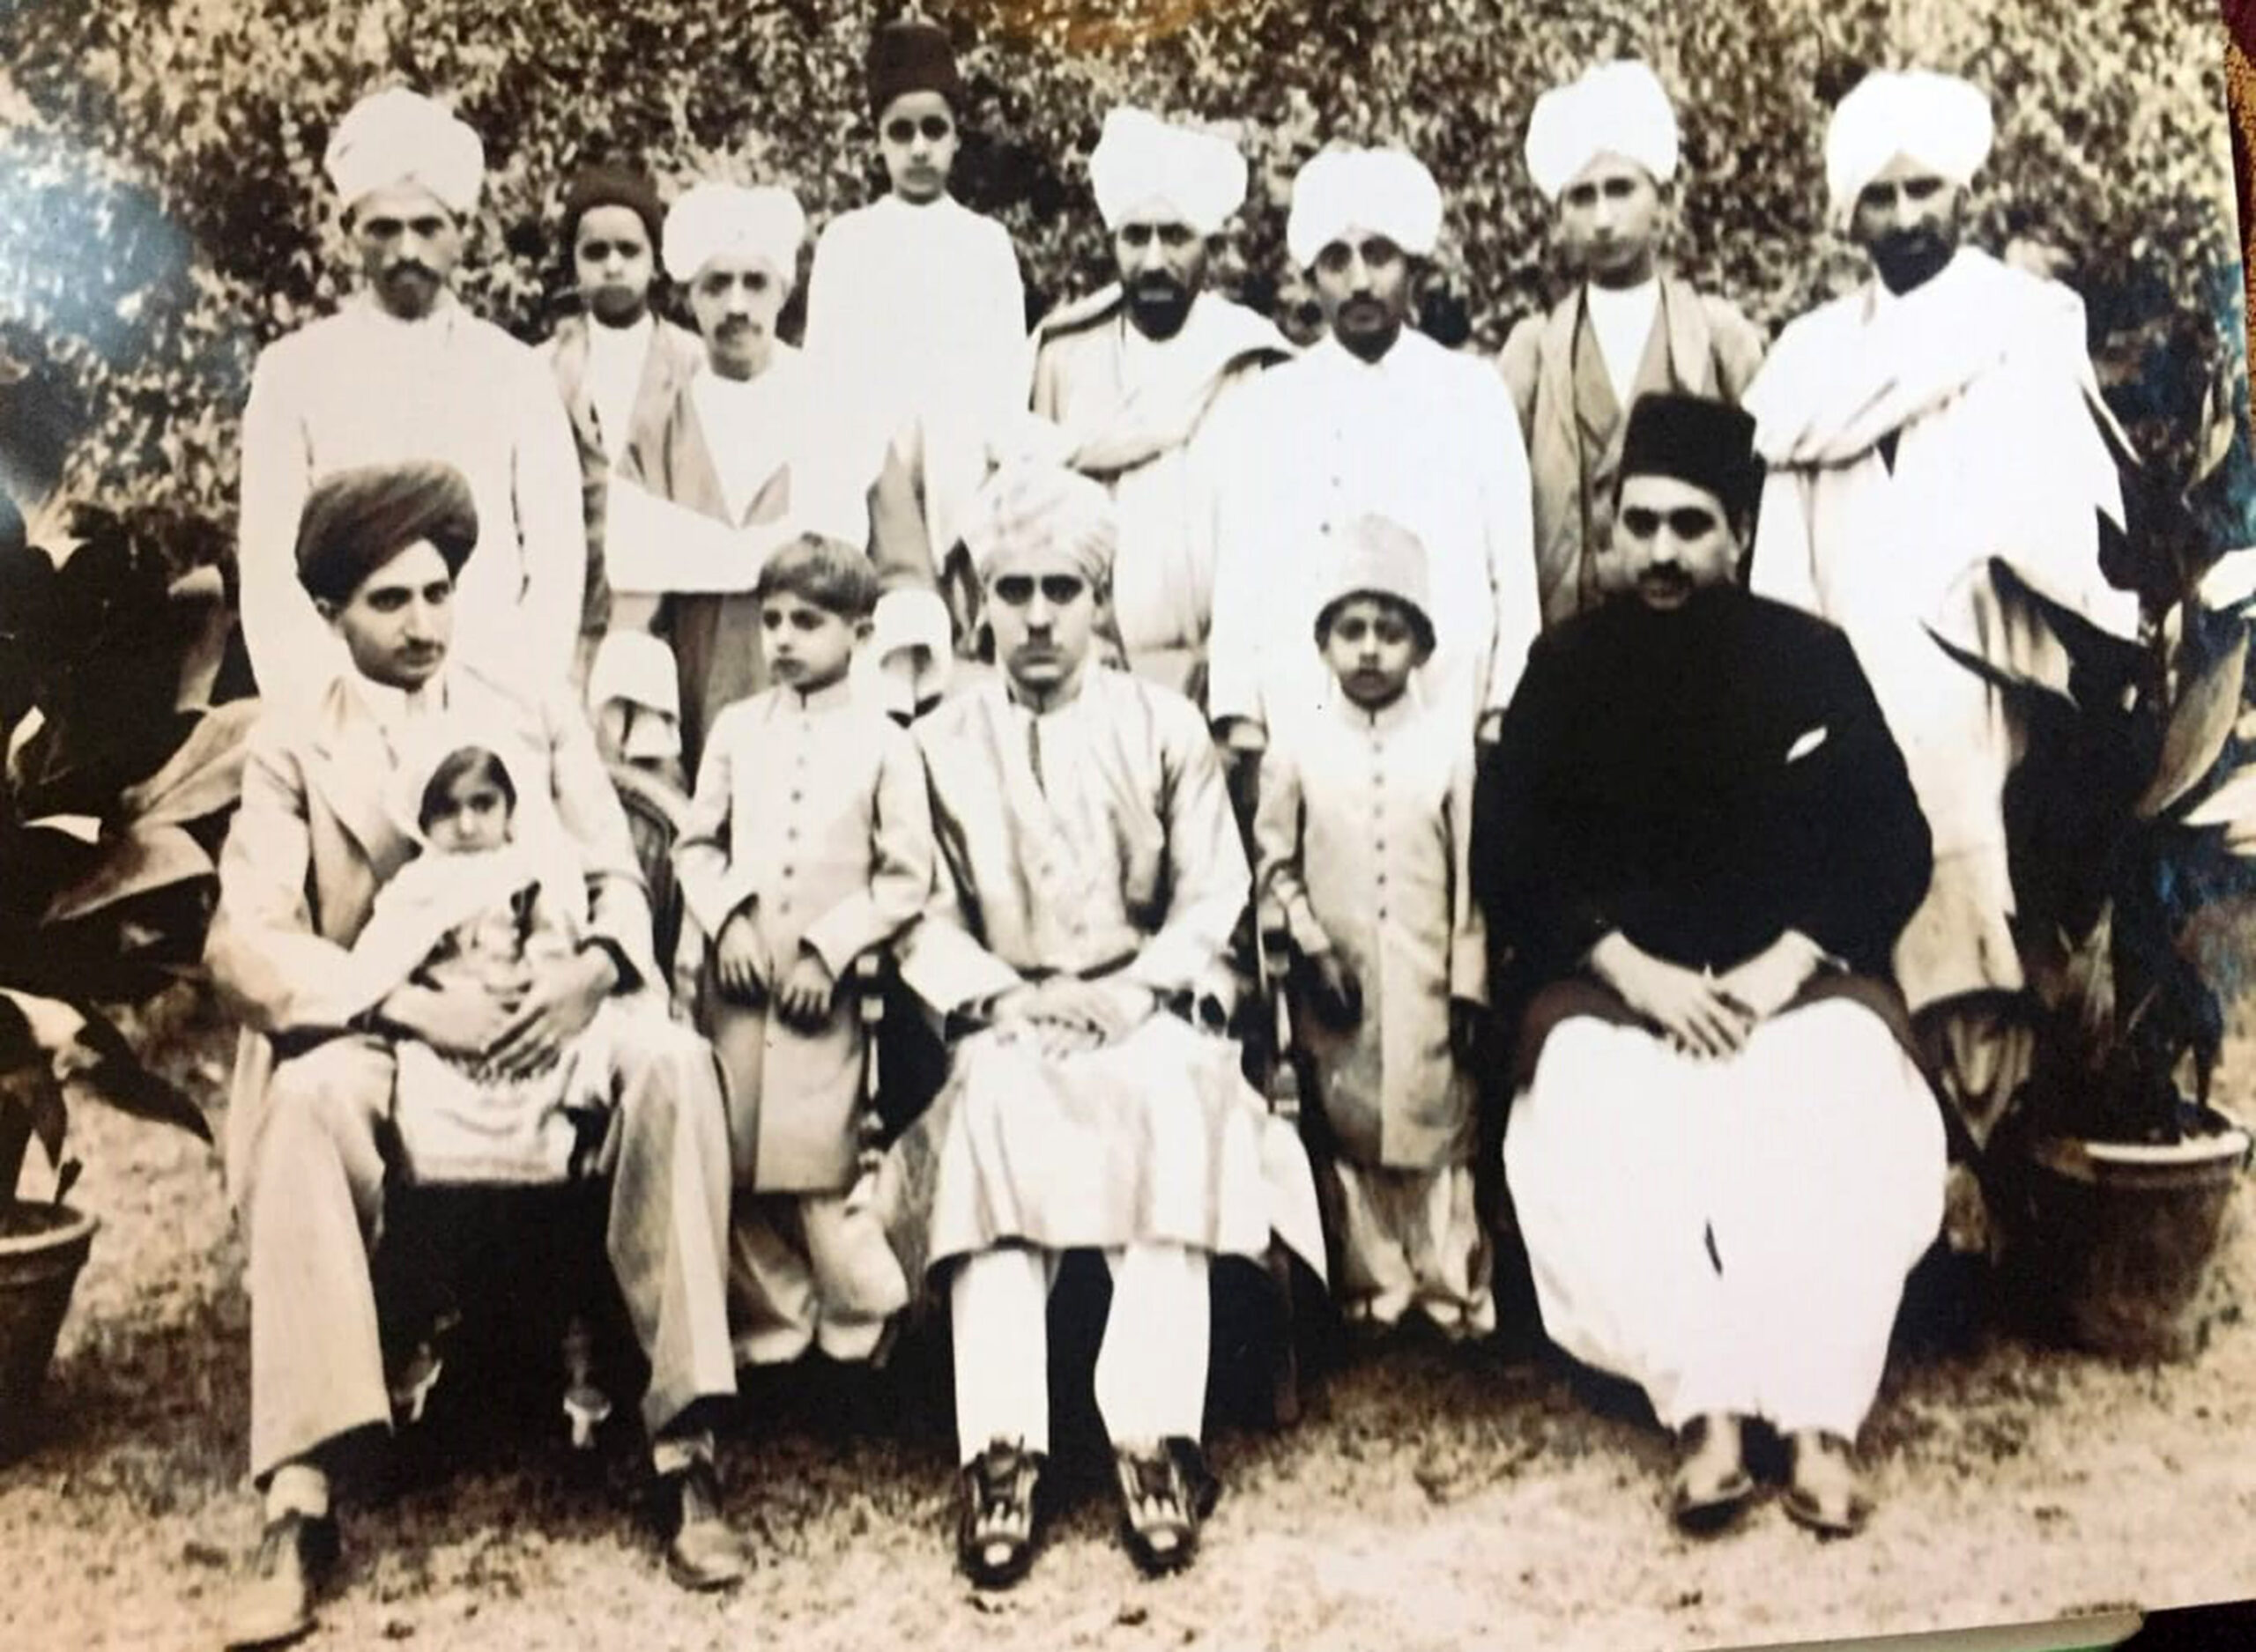 Saududin Shawl in a group photograph with his family members scaled